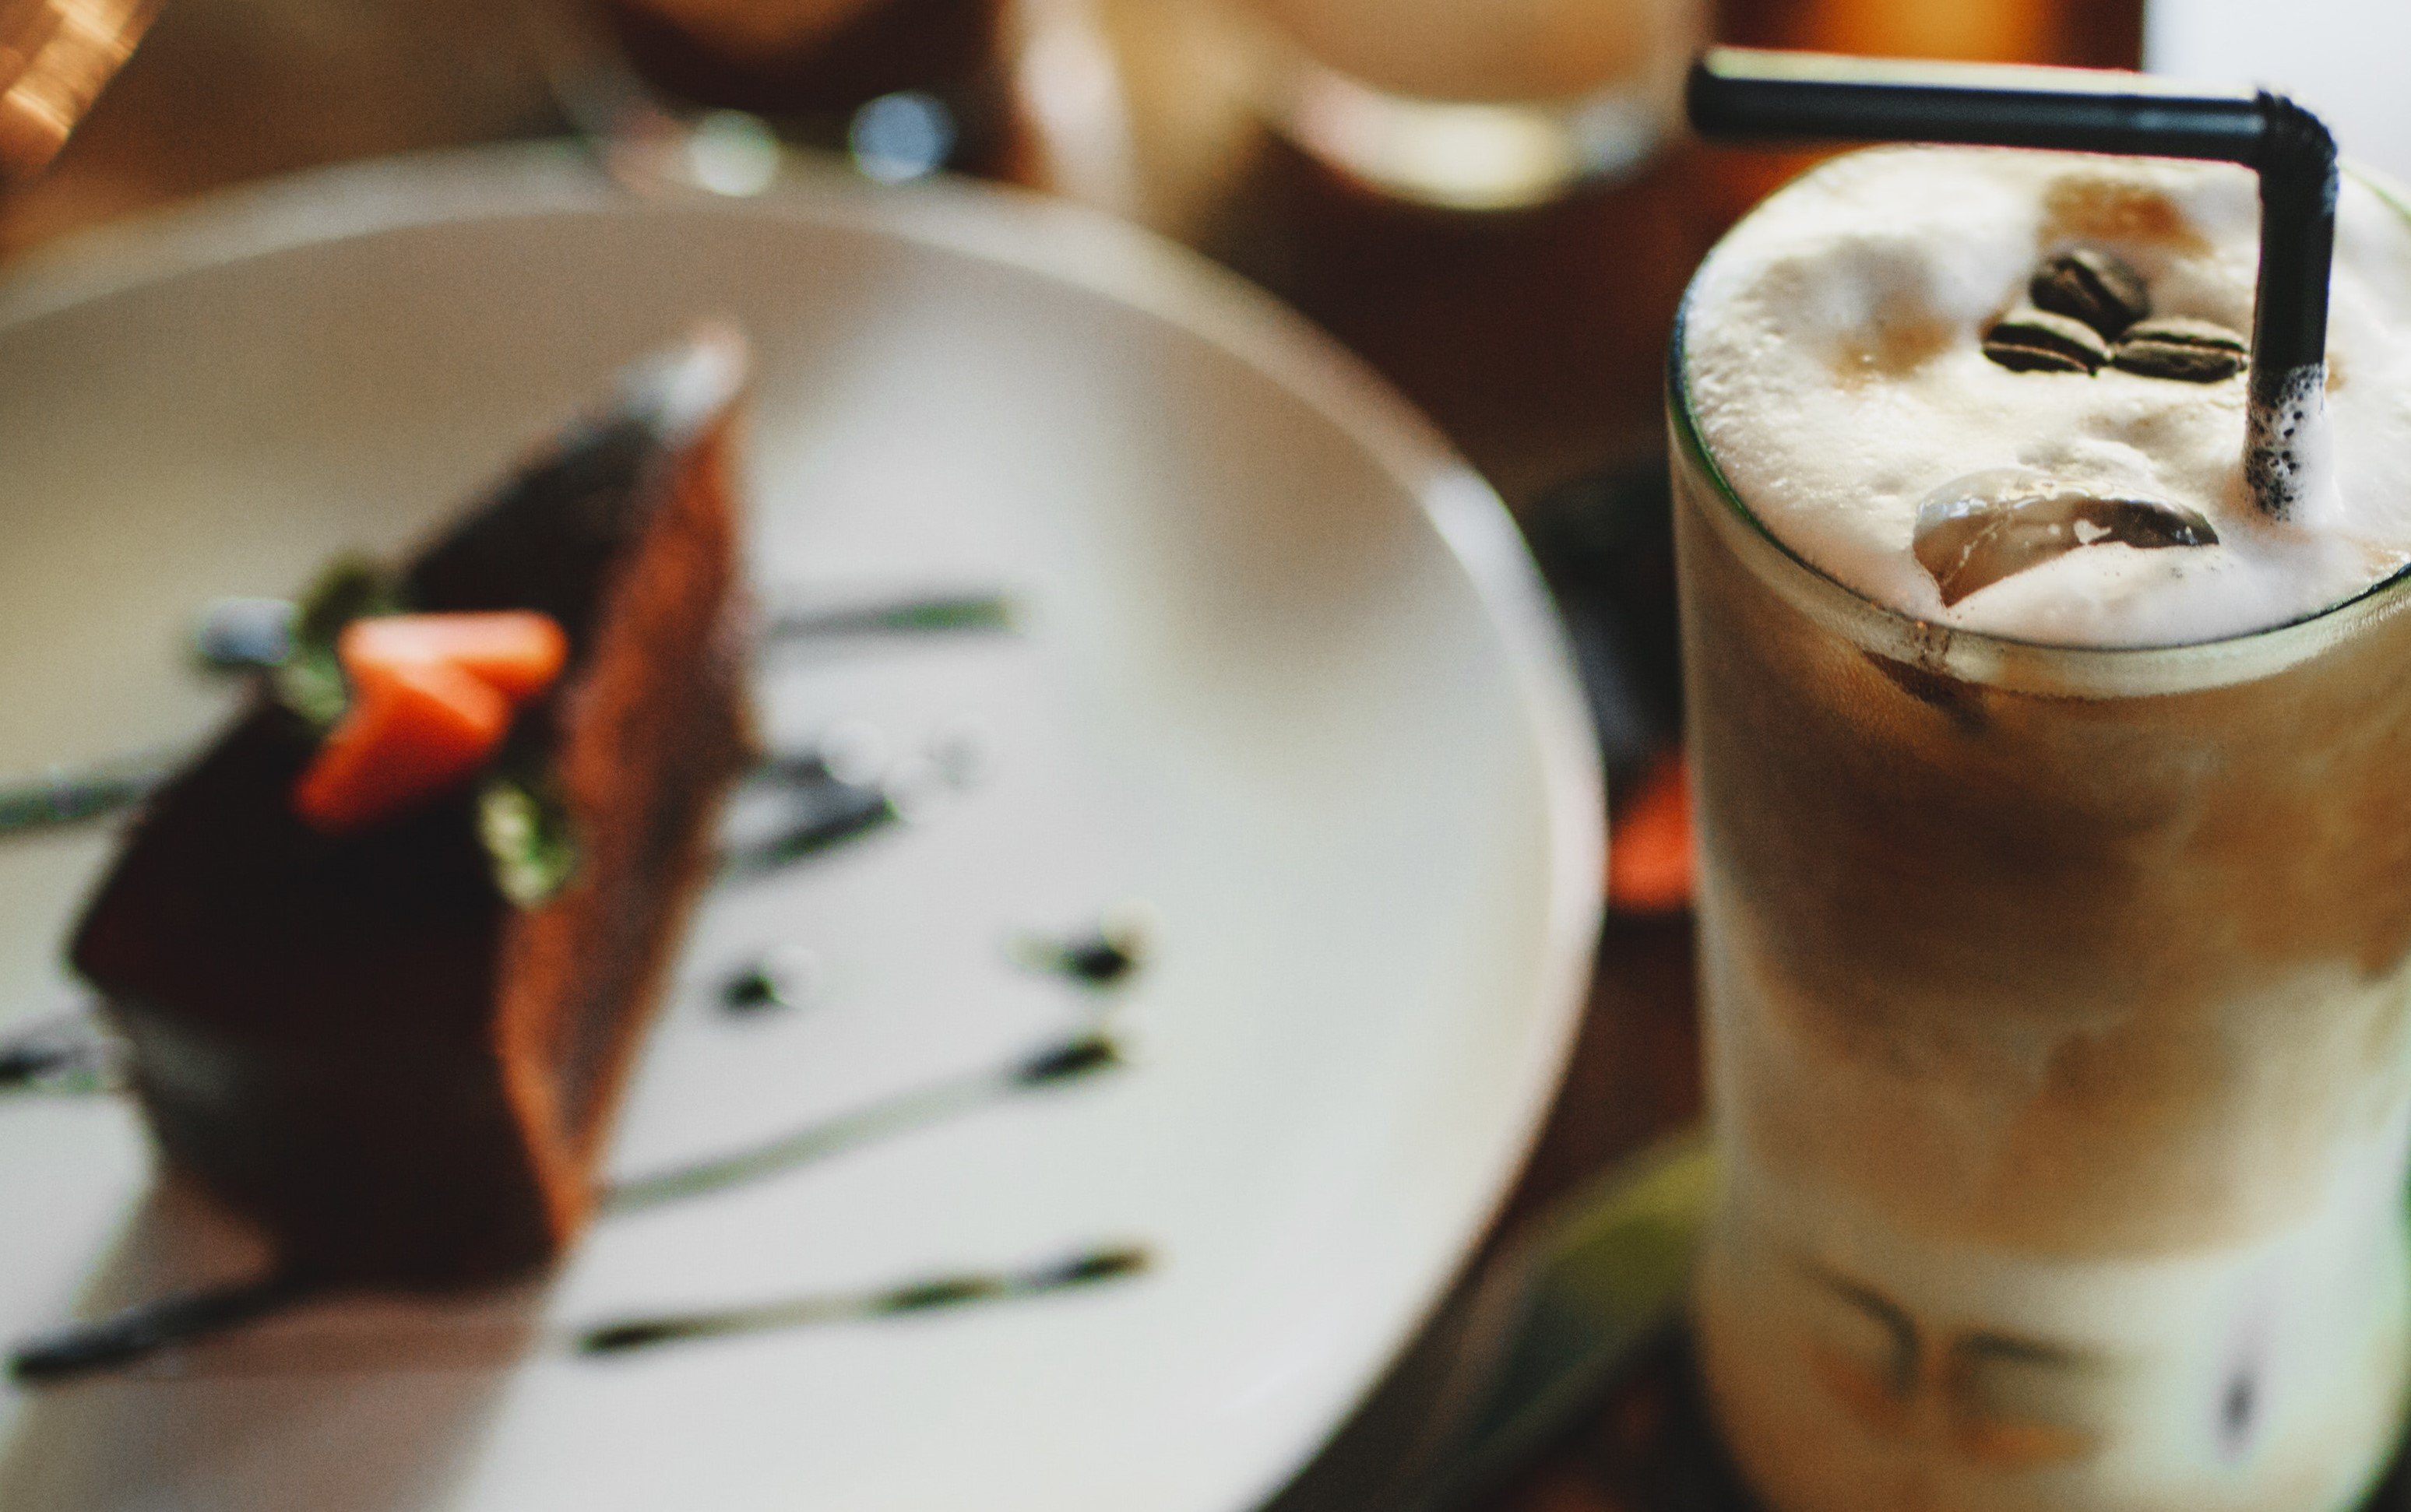 Adam ordered a slice of chocolate cake & a milkshake for the little girl and nothing for himself. | Source: Pexels